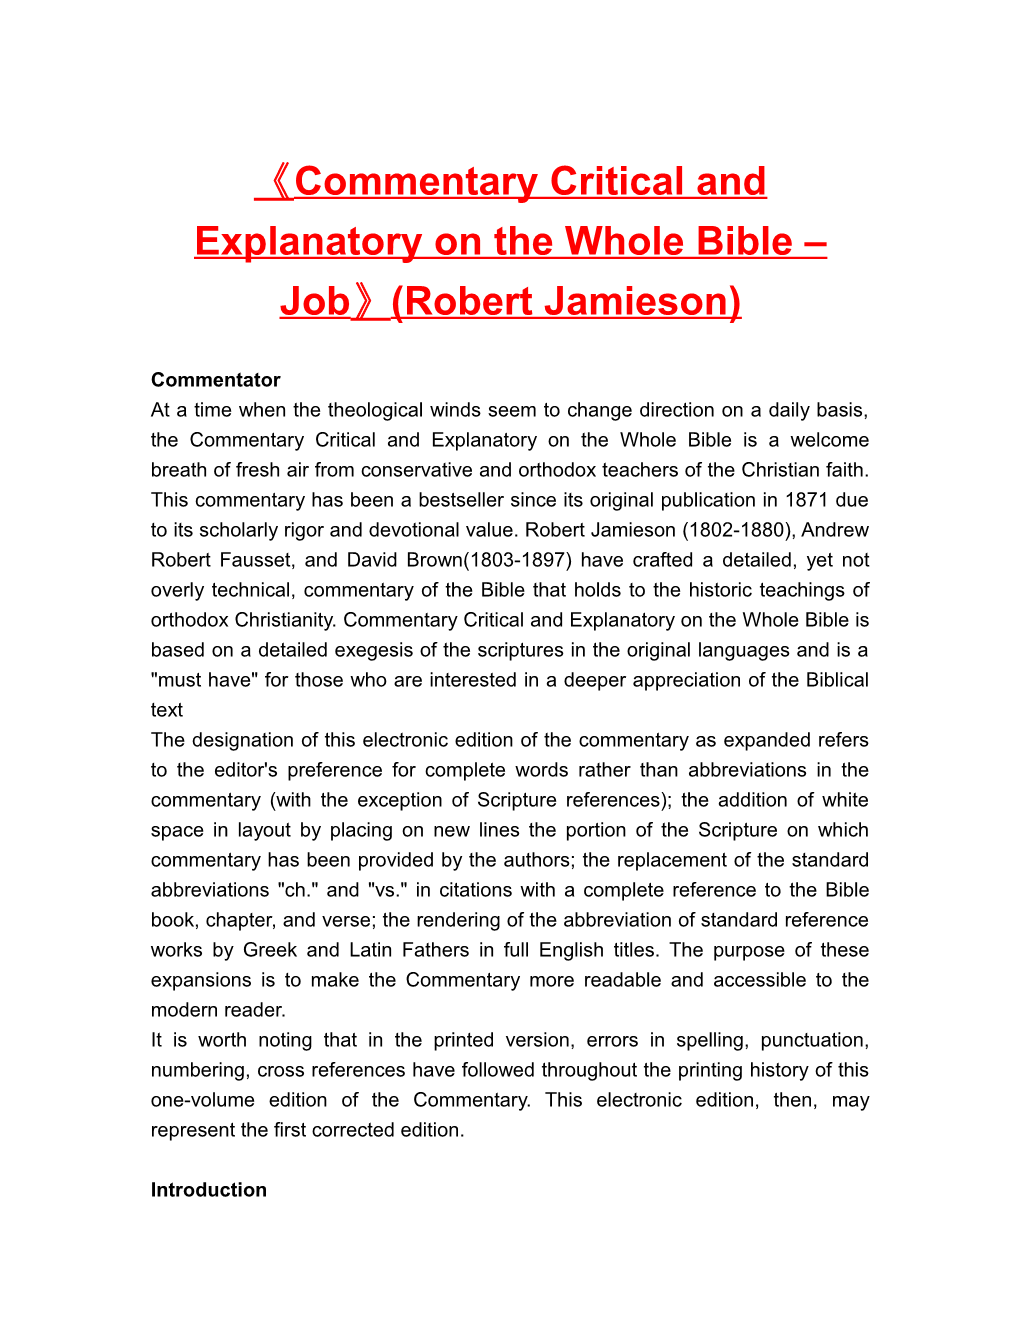 Commentary Critical and Explanatory on the Whole Bible Job (Robert Jamieson)